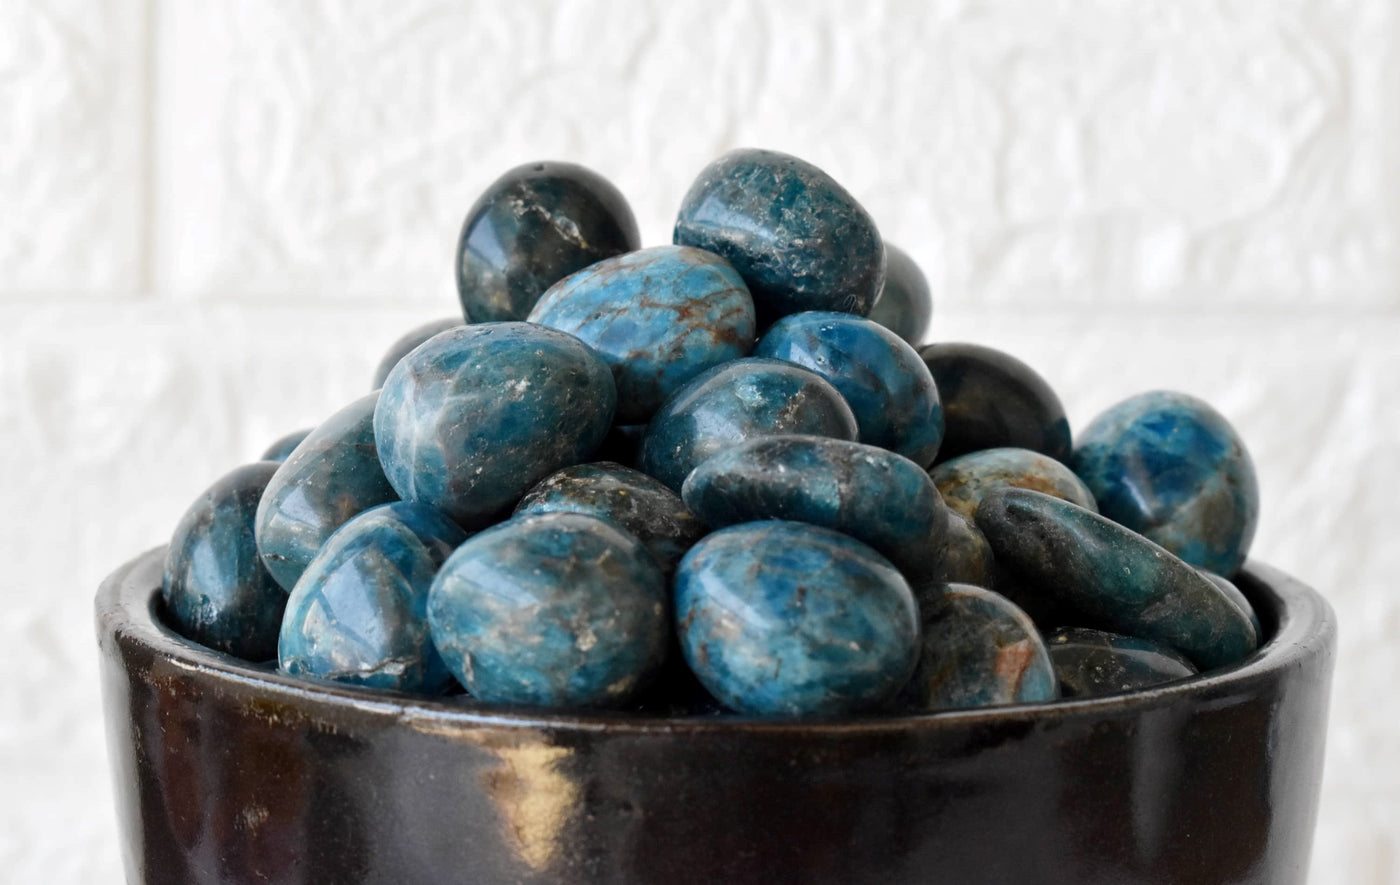 Apatite Tumbled Crystals (Psychic Abilities and Strength)